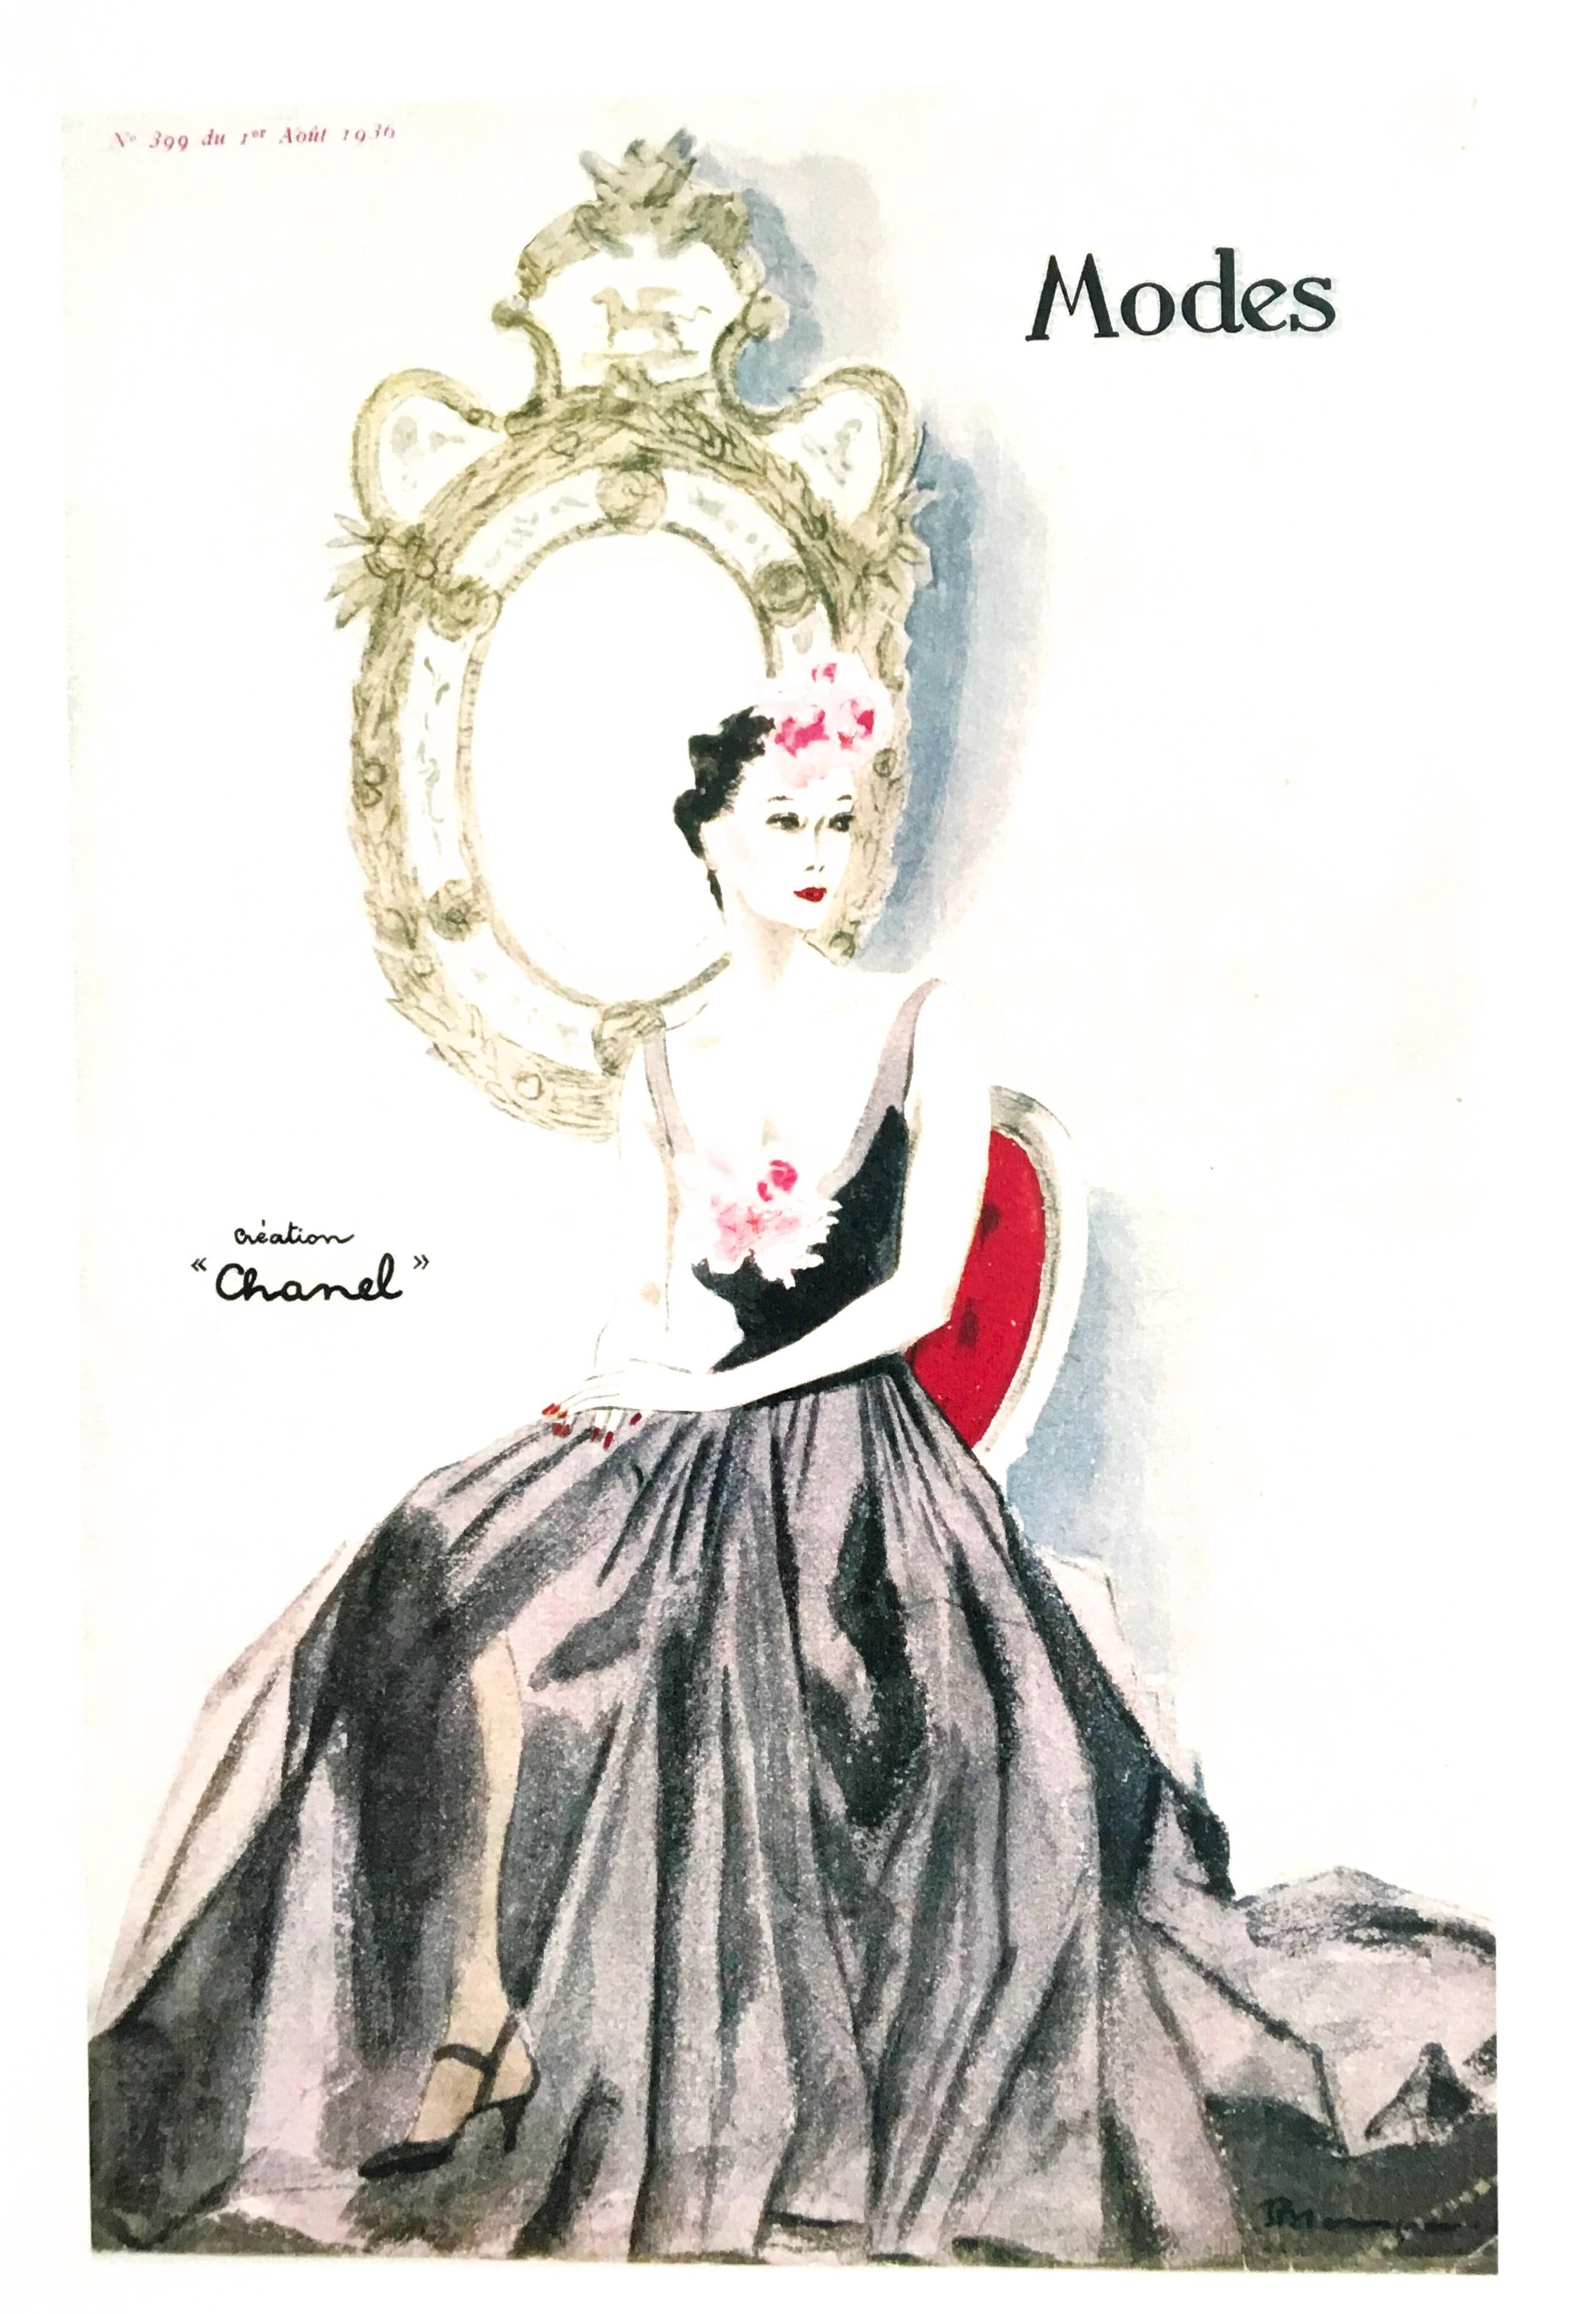 Chanel Vintage 1930's Ad Print - Seated Woman in Gown In Excellent Condition For Sale In Boca Raton, FL